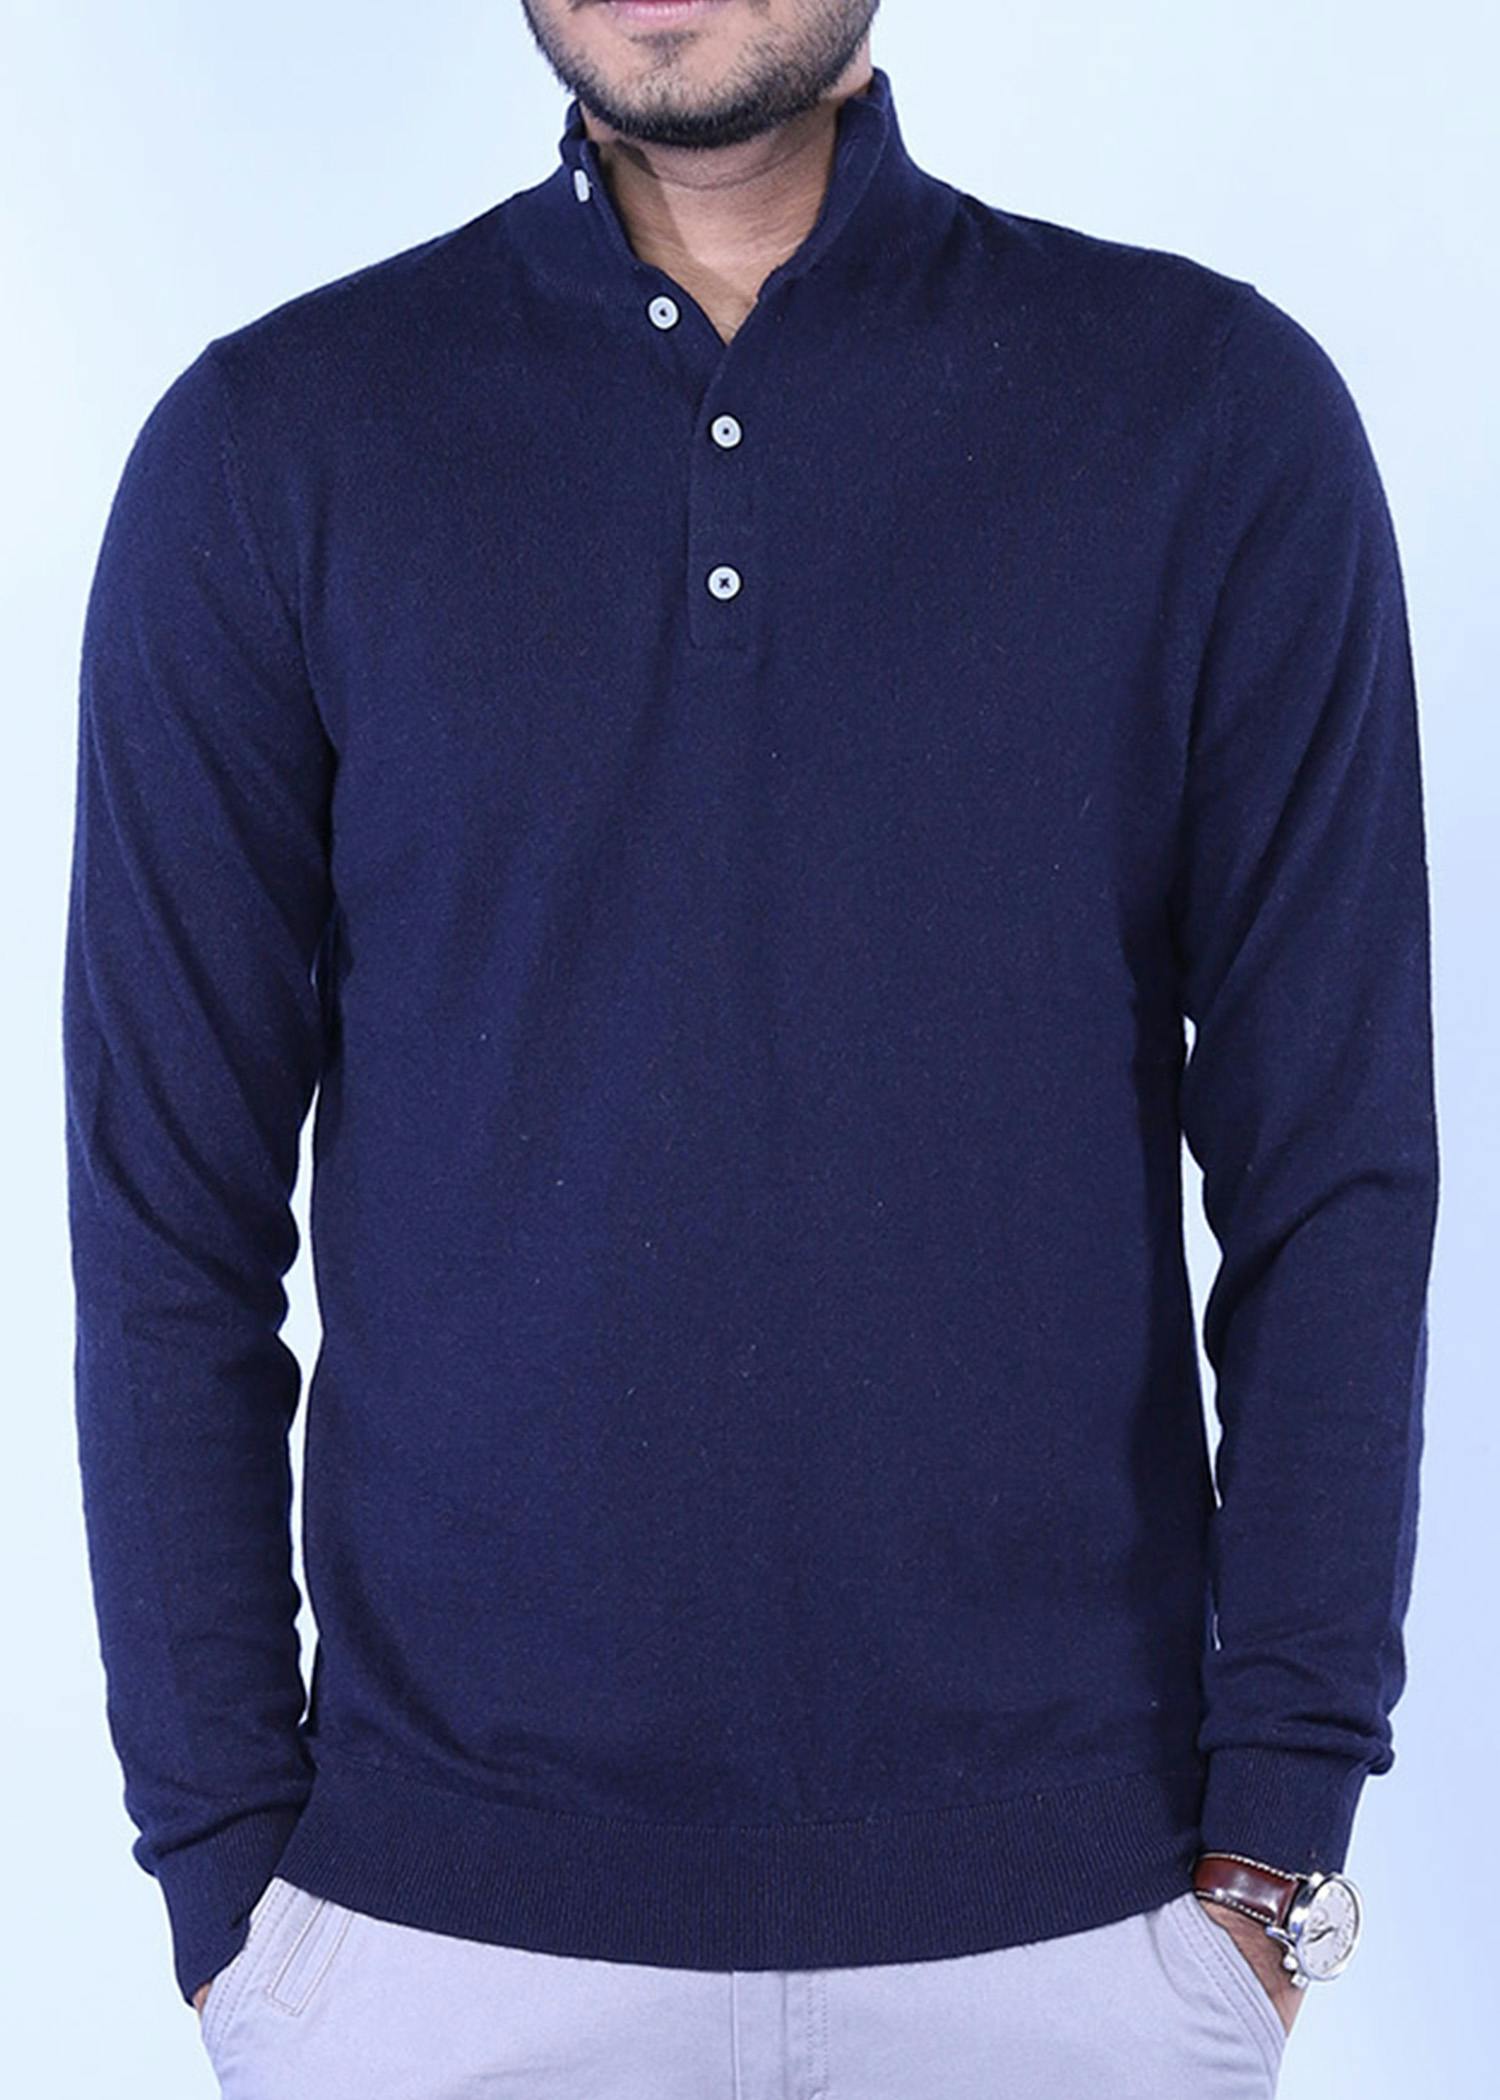 hornero i sweater navy color headcropped